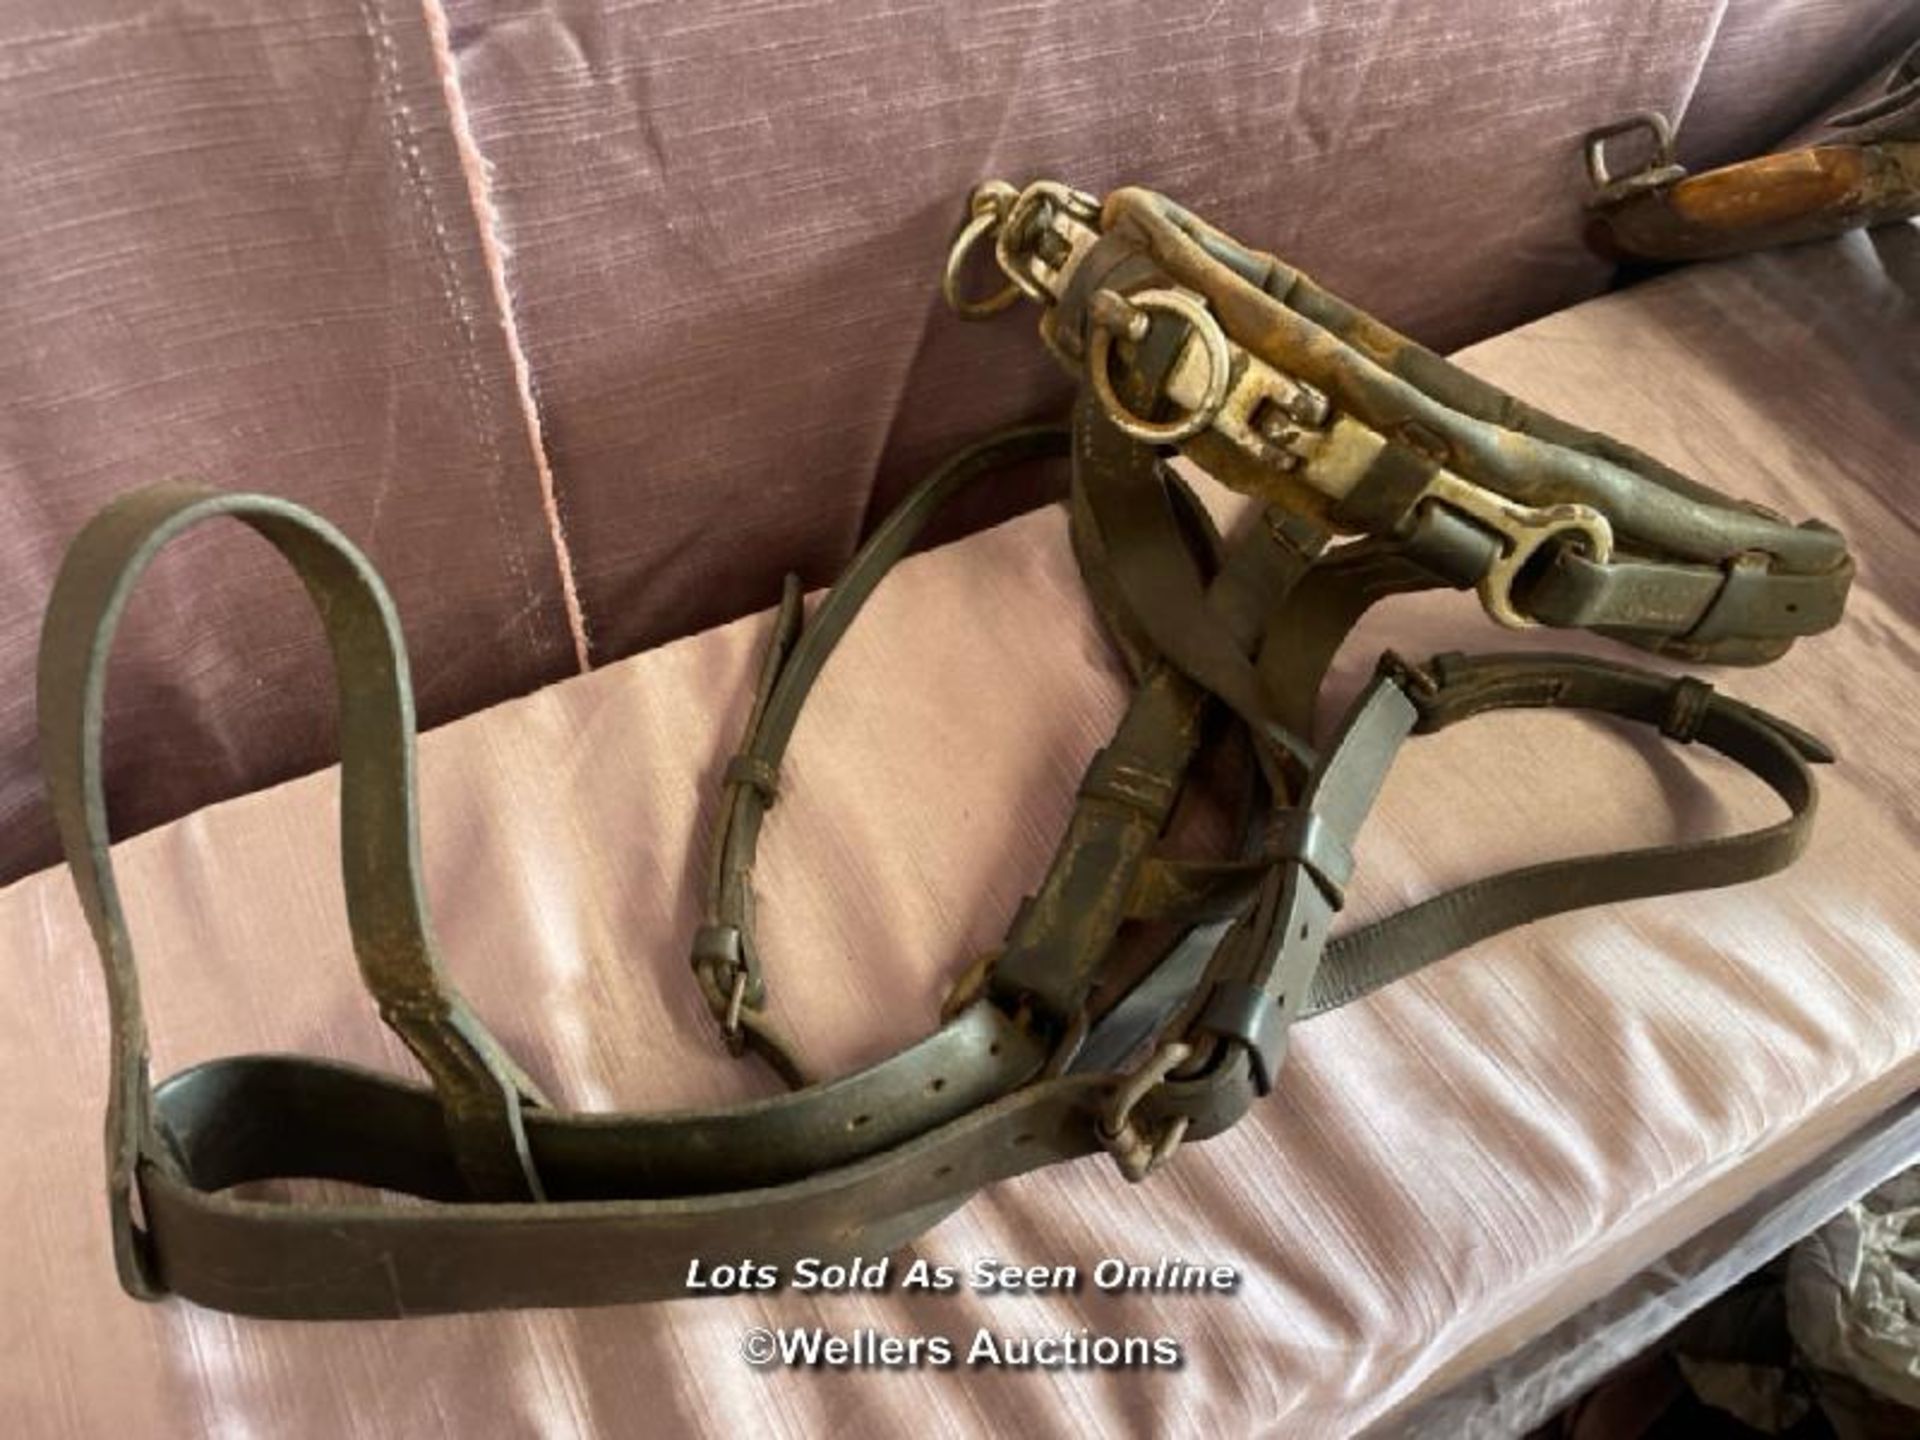 CIRCA 1900, BOER WAR PERIOD MILITARY SADDLE WITH ASSOCIATED HORSE BIT AND HARNESS - Image 2 of 4